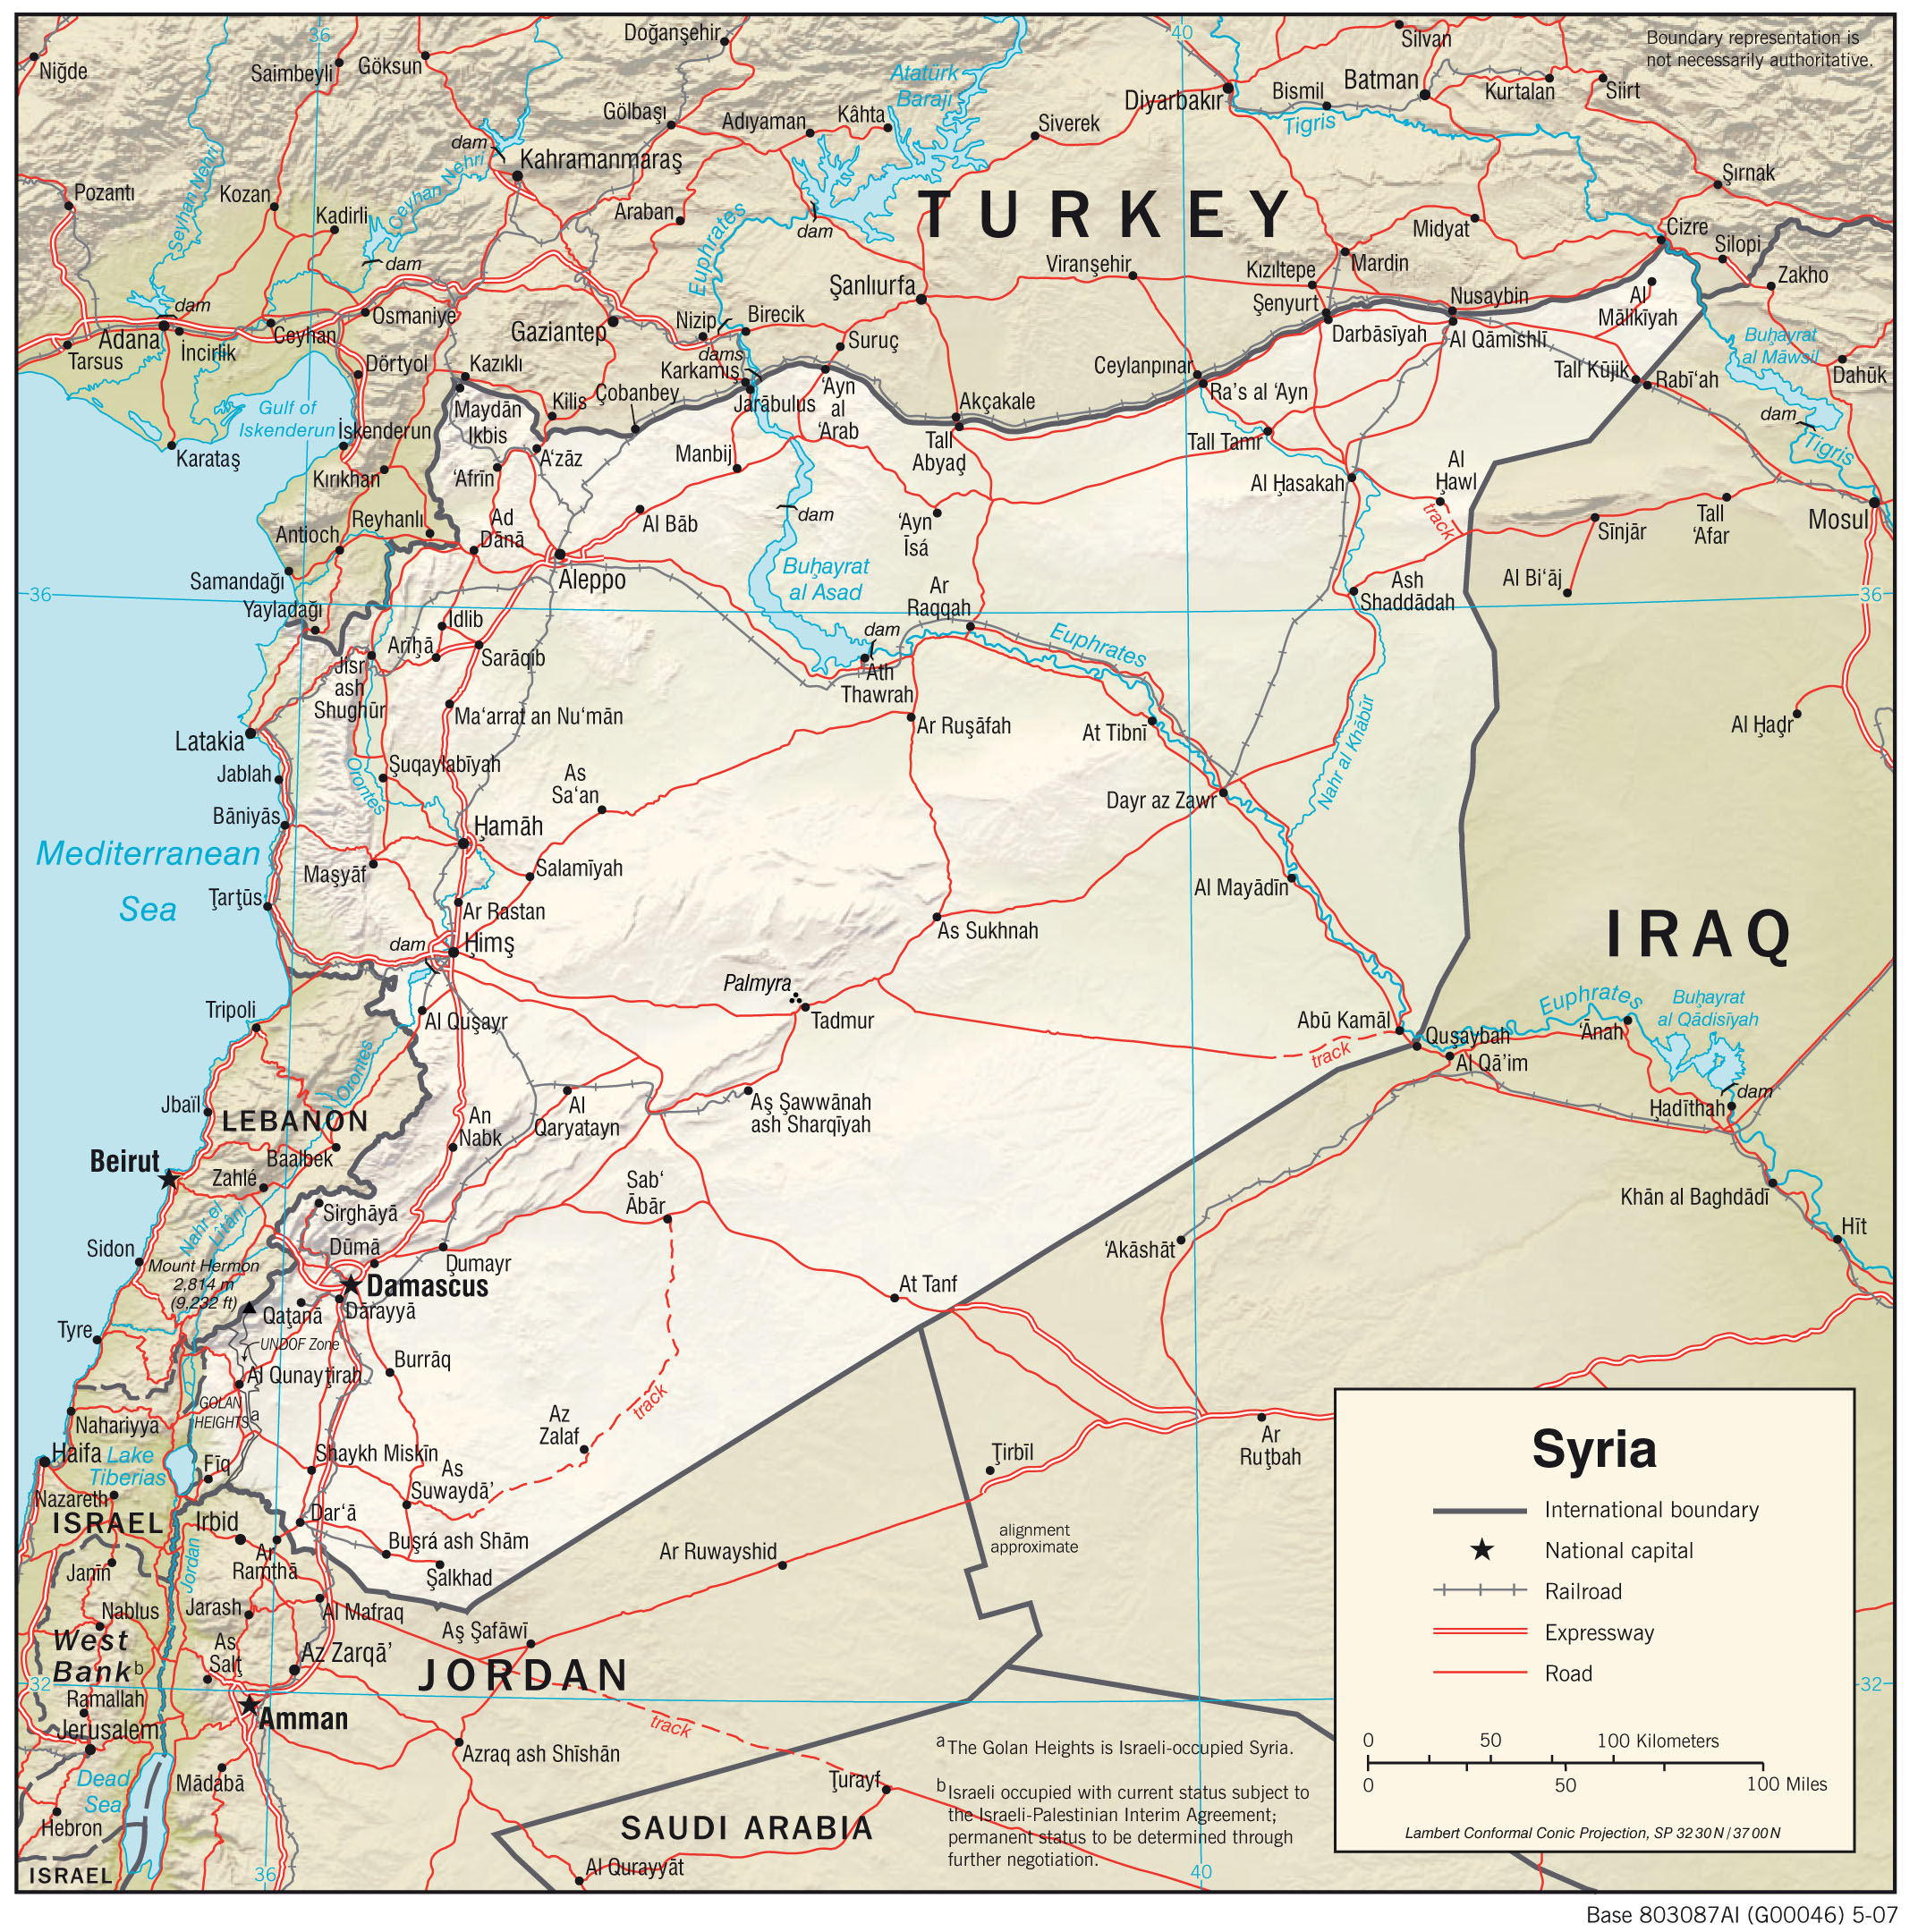 http://www.lib.utexas.edu/maps/middle_east_and_asia/syria_rel-2007.jpg